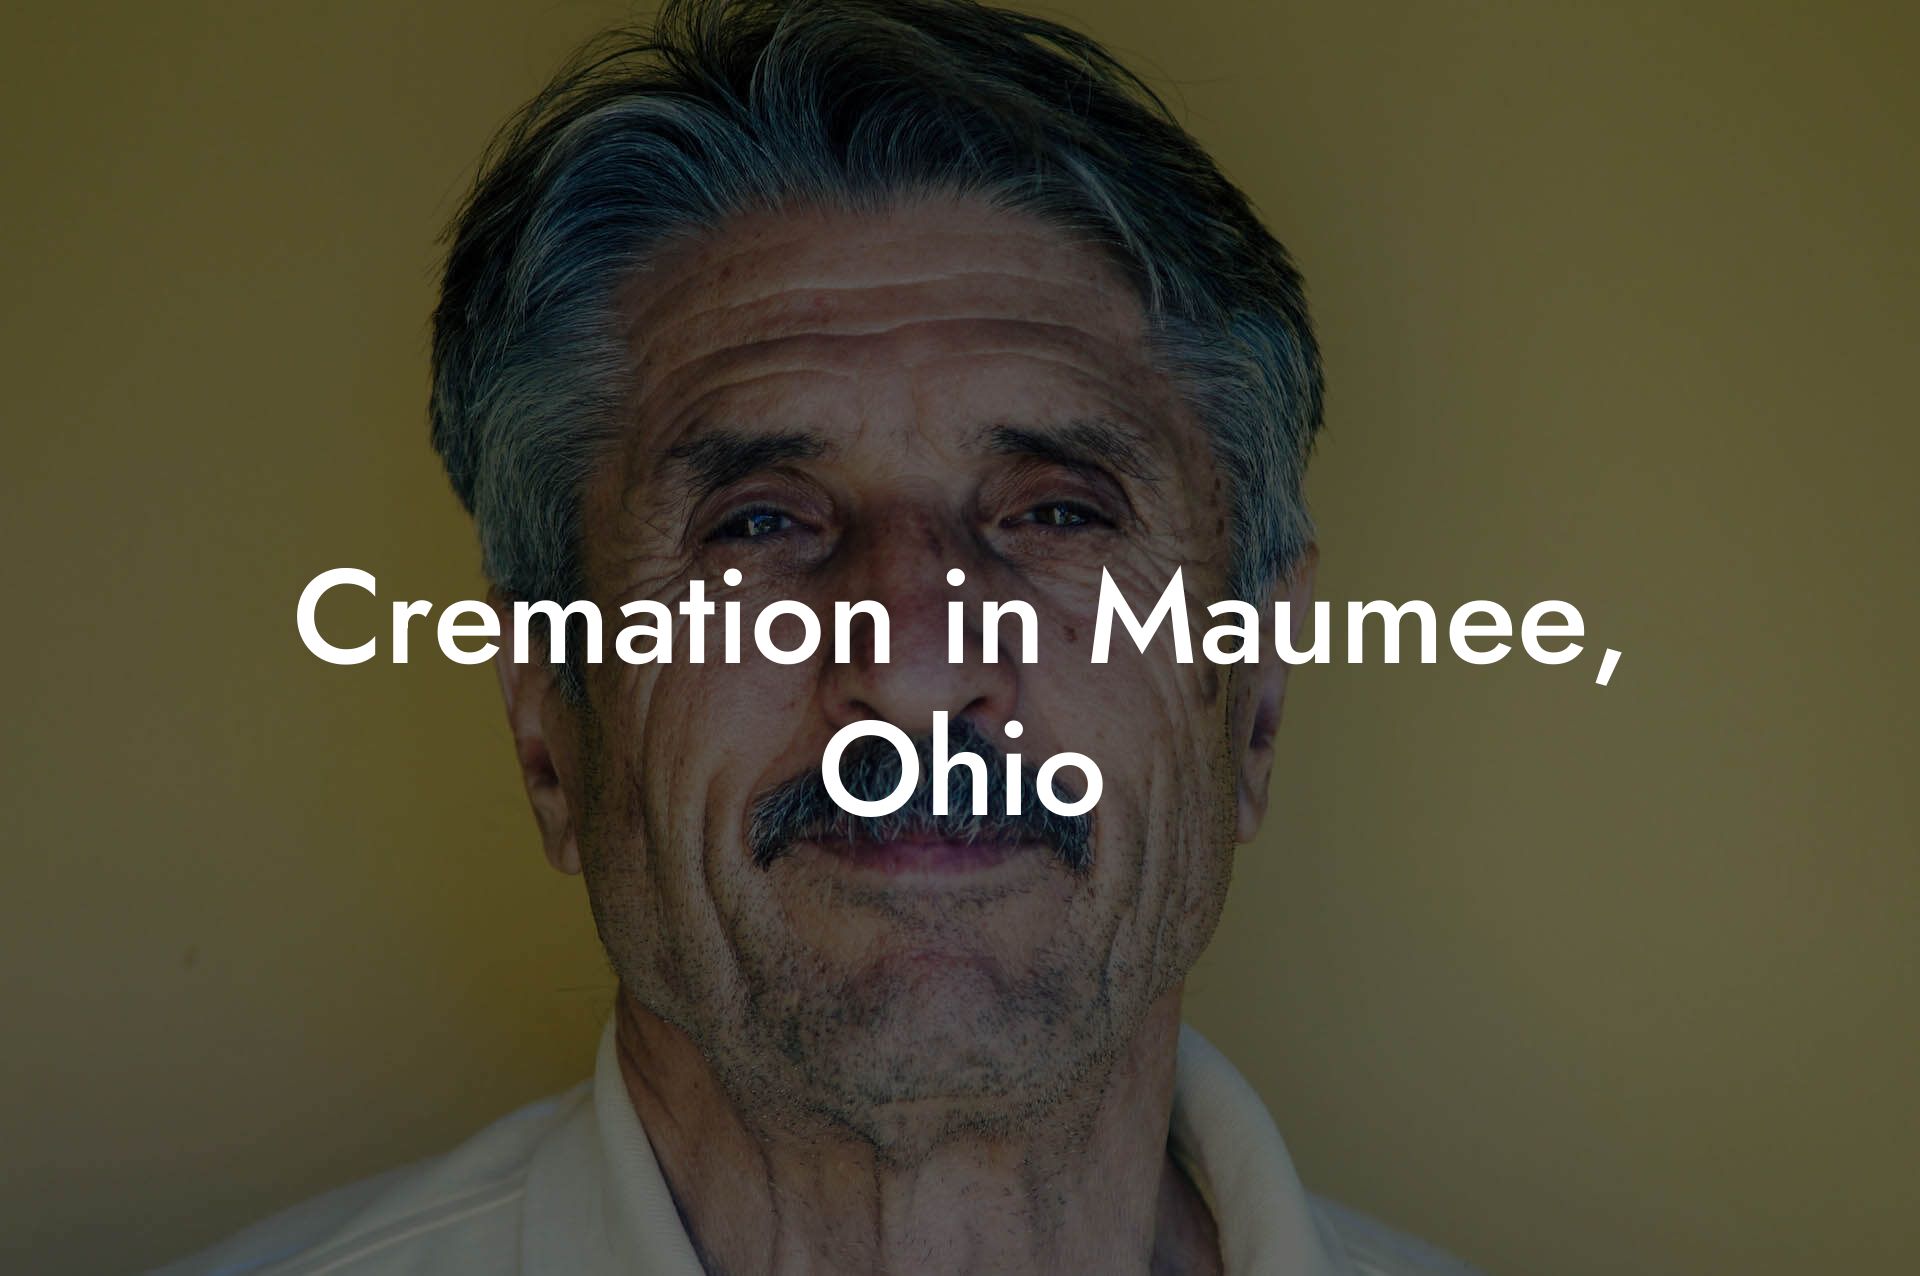 Cremation in Maumee, Ohio